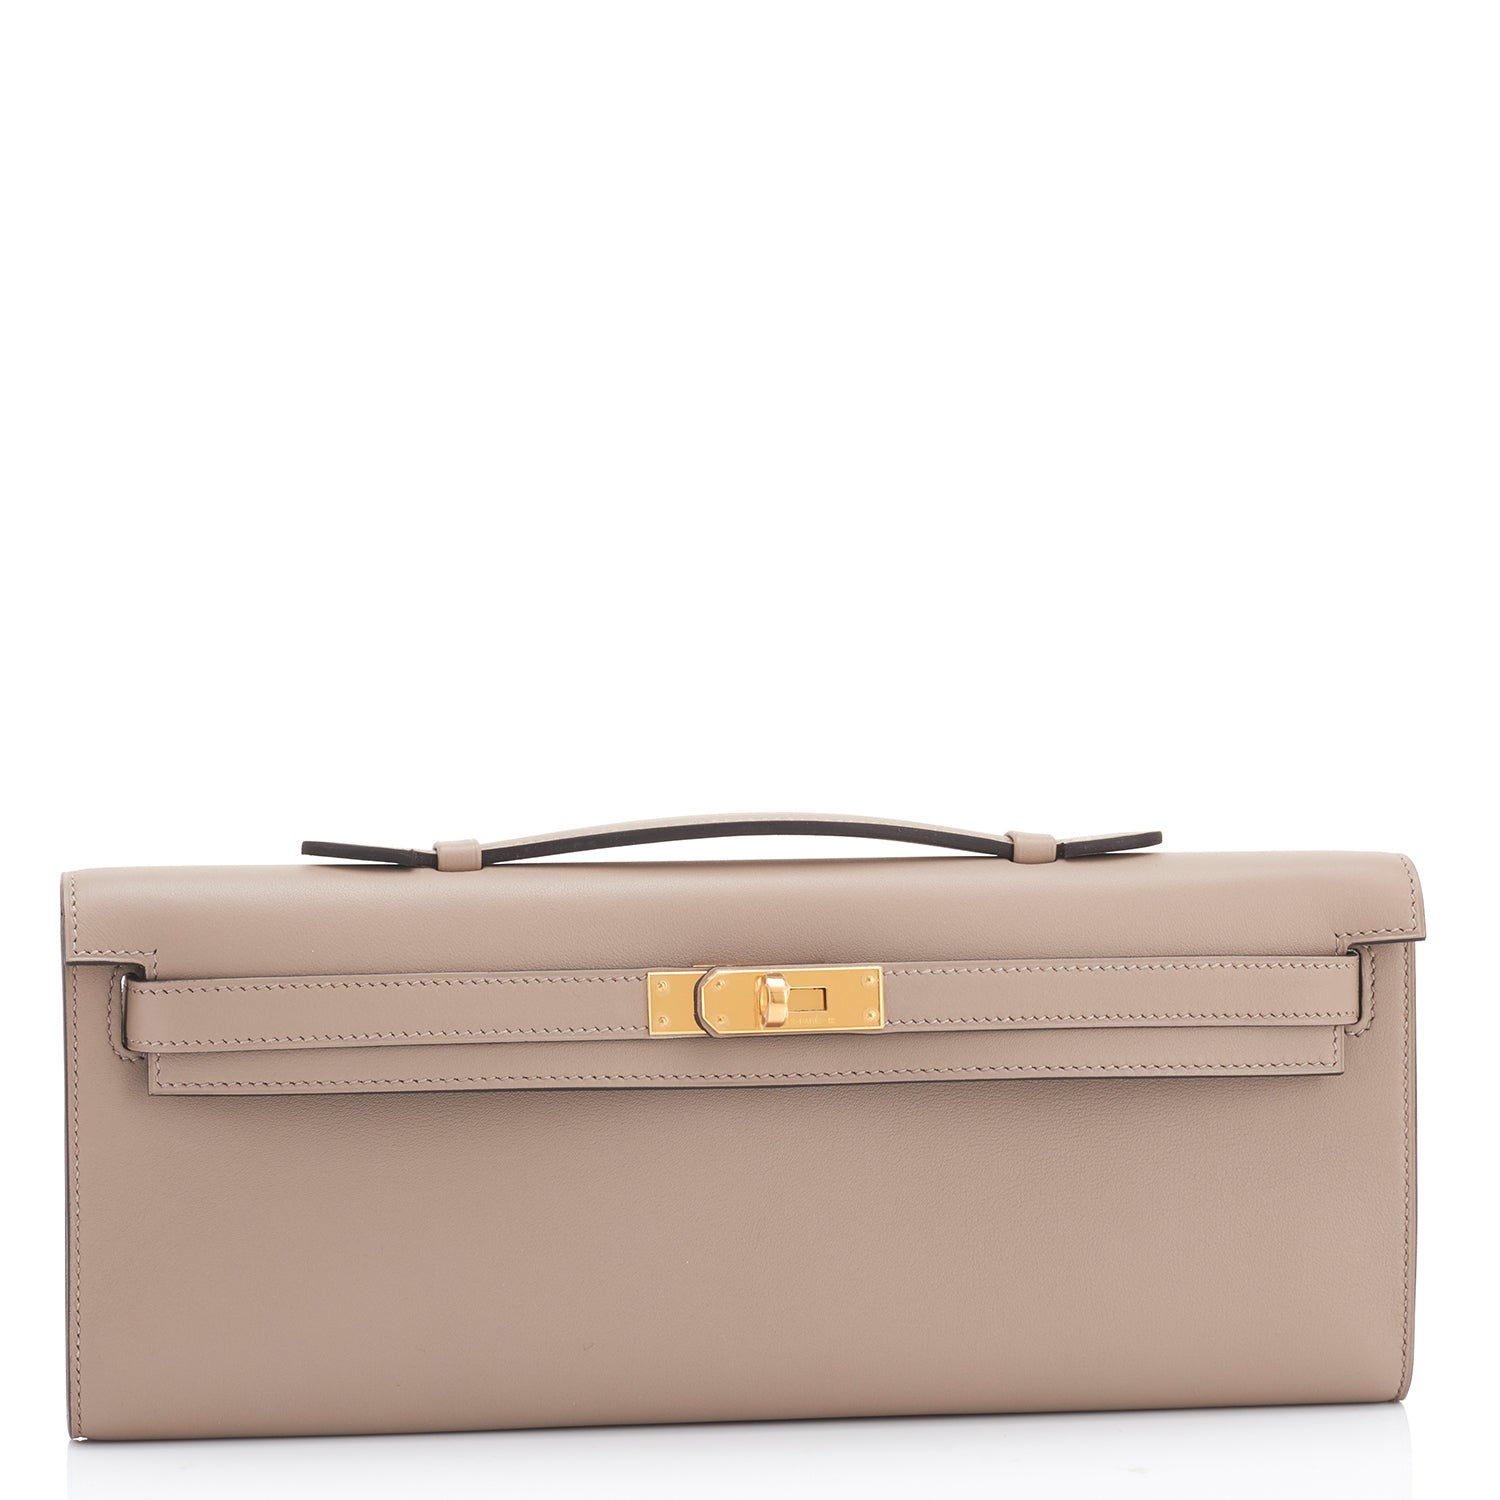 Gold Kelly Pochette in Swift Leather with Gold Hardware, 2021, Handbags &  Accessories, 2021